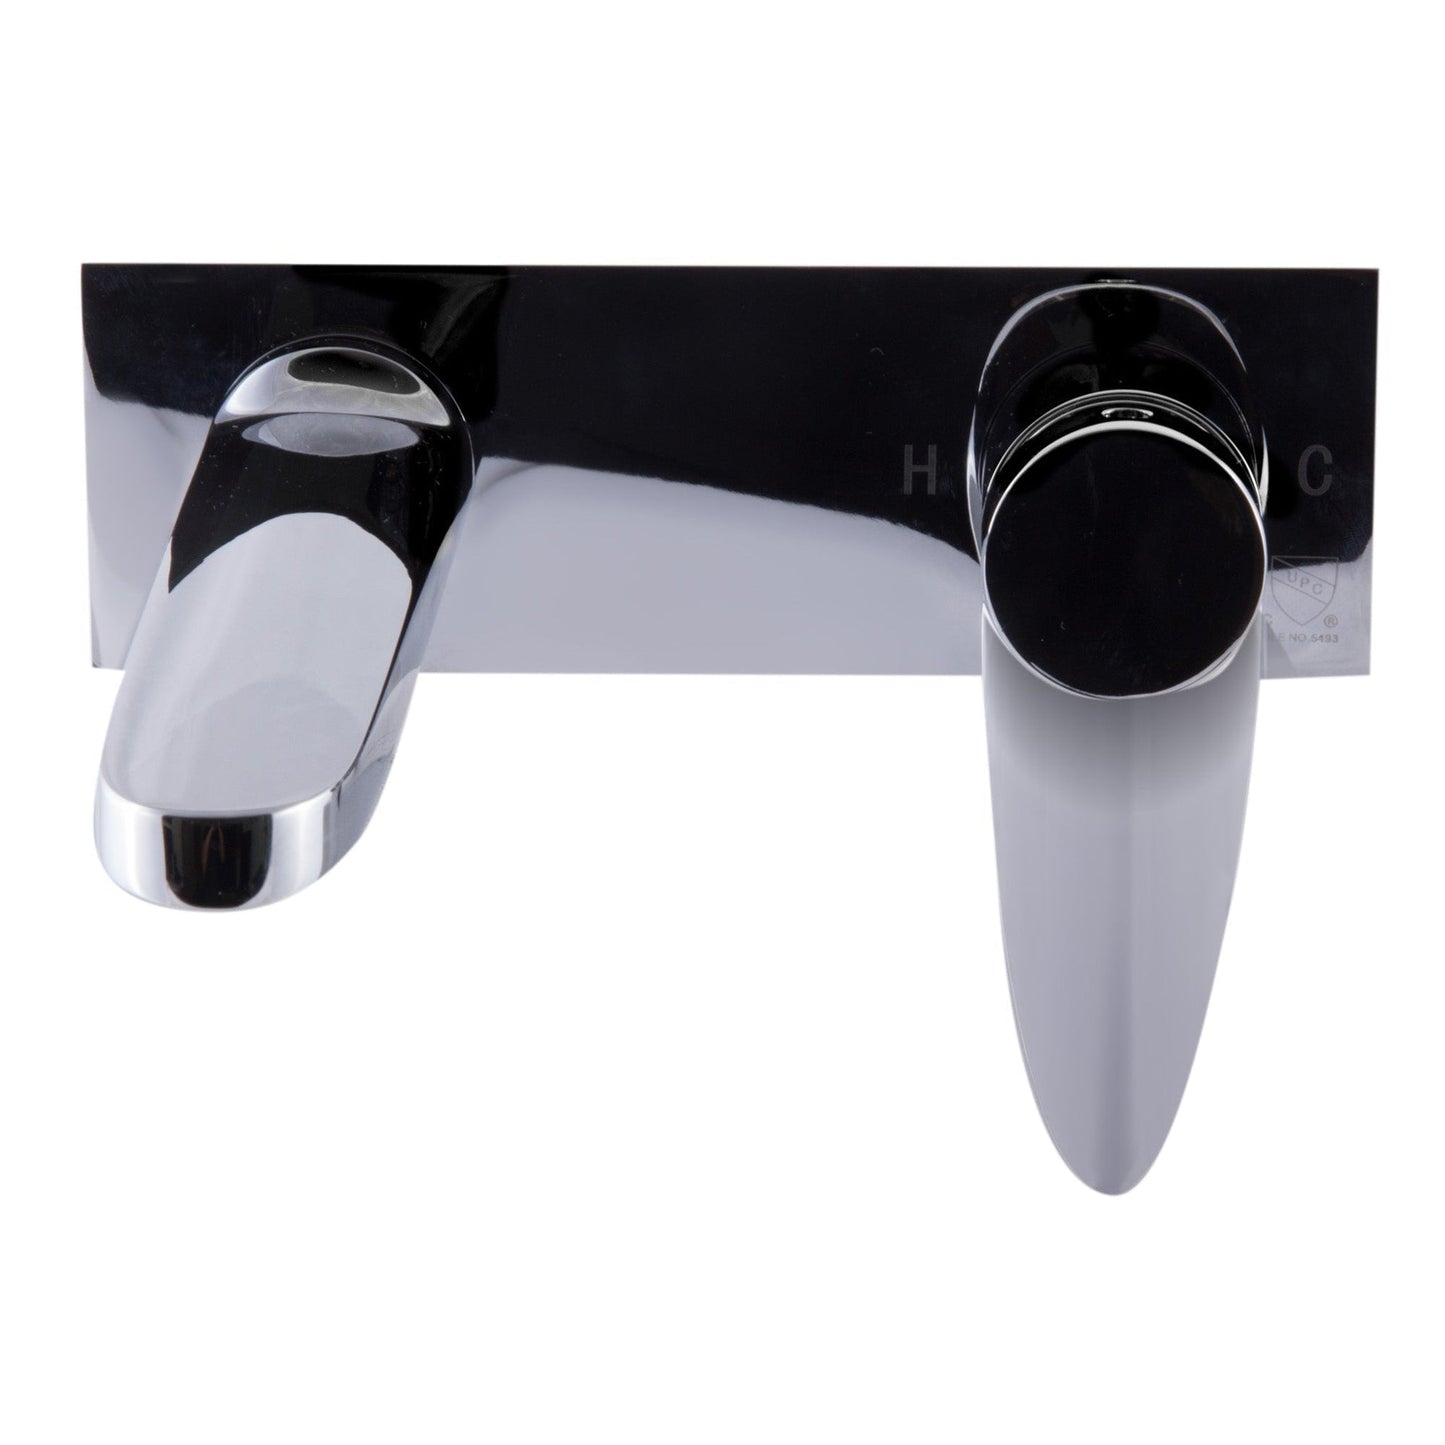 ALFI Brand AB1772-PC Polished Chrome Wall-Mounted Brass Bathroom Sink Faucet With Single Lever